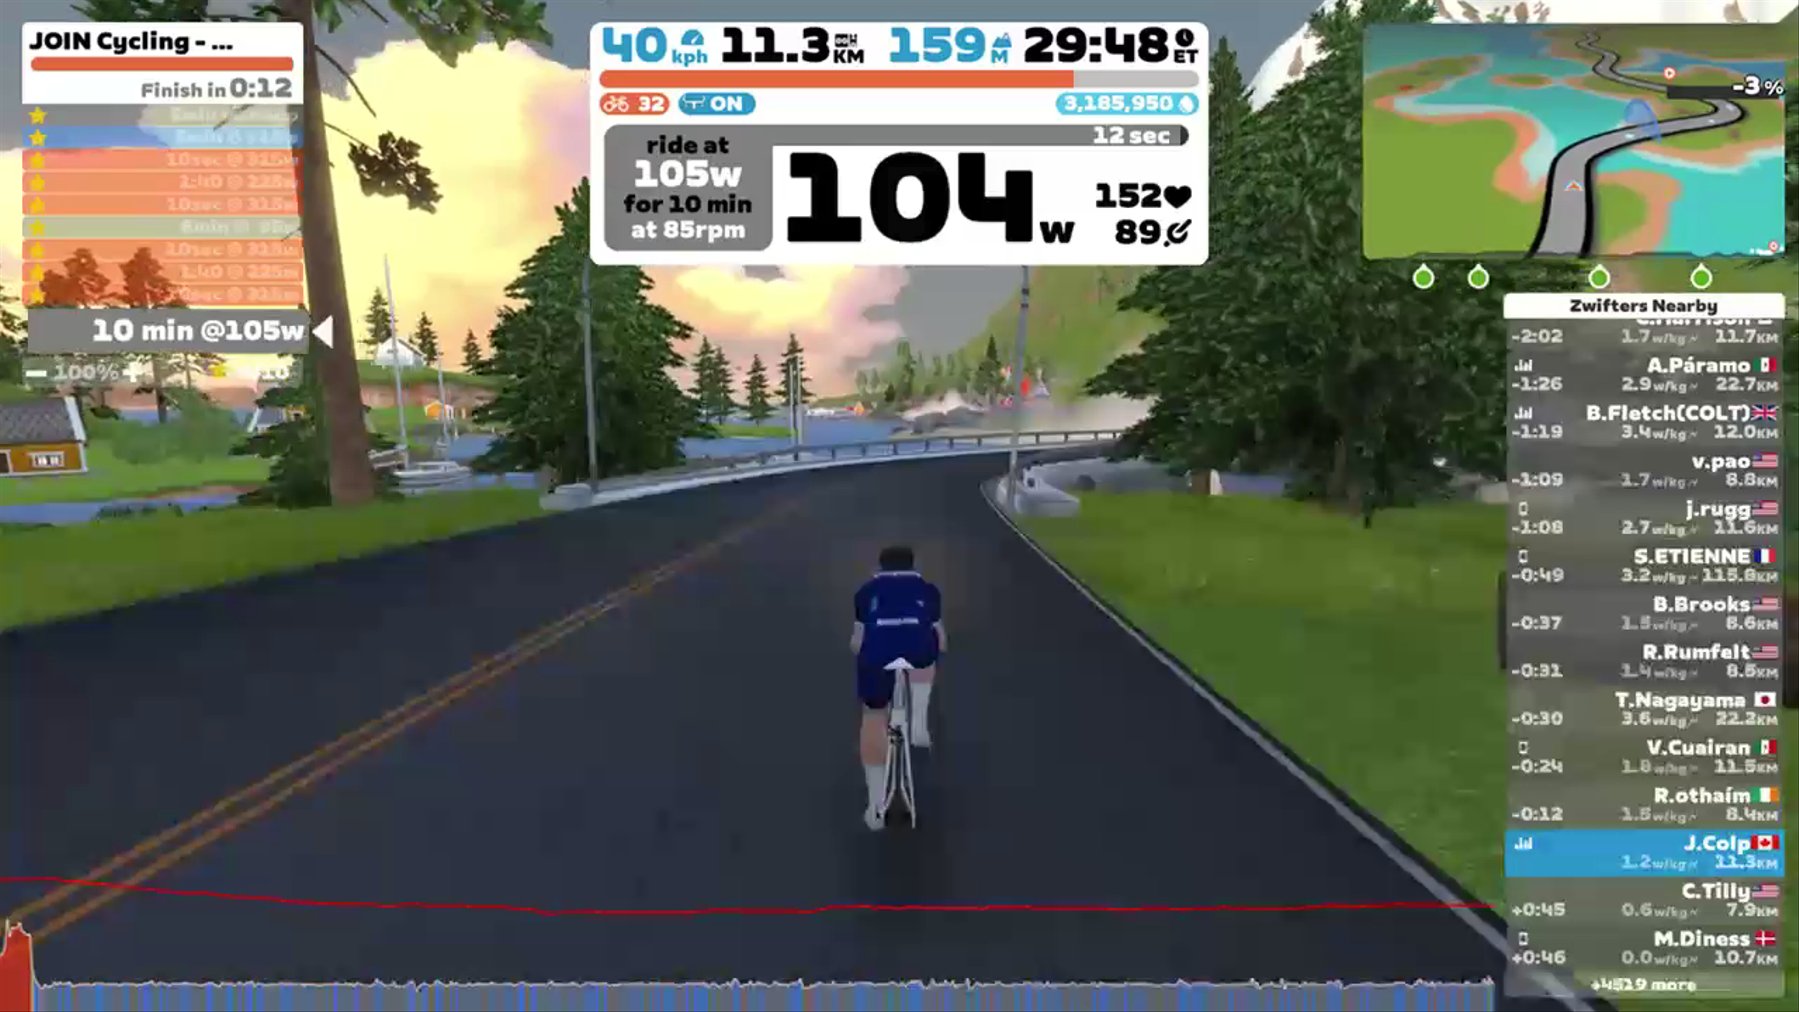 Zwift - JOIN Cycling - Sprint-VO2max-sprint in Watopia